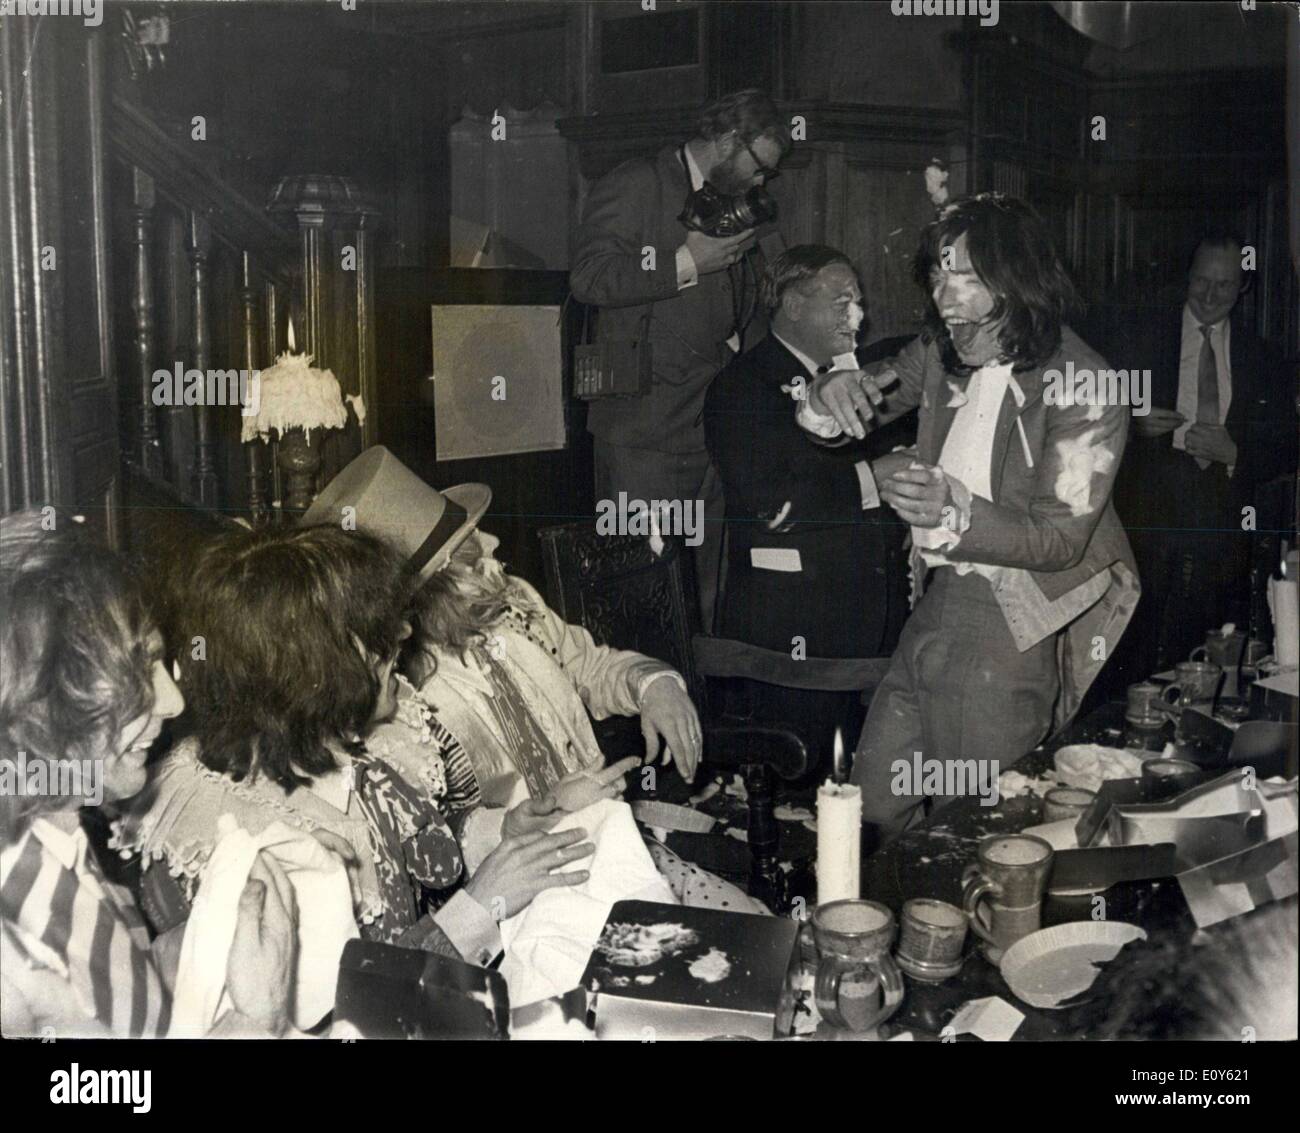 Dec. 05, 1968 - Custard Pie Throwing At Beggars Banquet Given By The Rolling Stones. The Rolling Stones today held a Beggars Banquet, with serving wenches, etc., to which a number of journalists friends, television folk et al, were invited, in the Elizabethan Room, Gore Hotel, Queensgate, The Banquet was rounded up with a custard pie battle. Photo Shows: Rolling Stone Mick Jagger, on right, having fun during the custard pie throwing today. Stock Photo